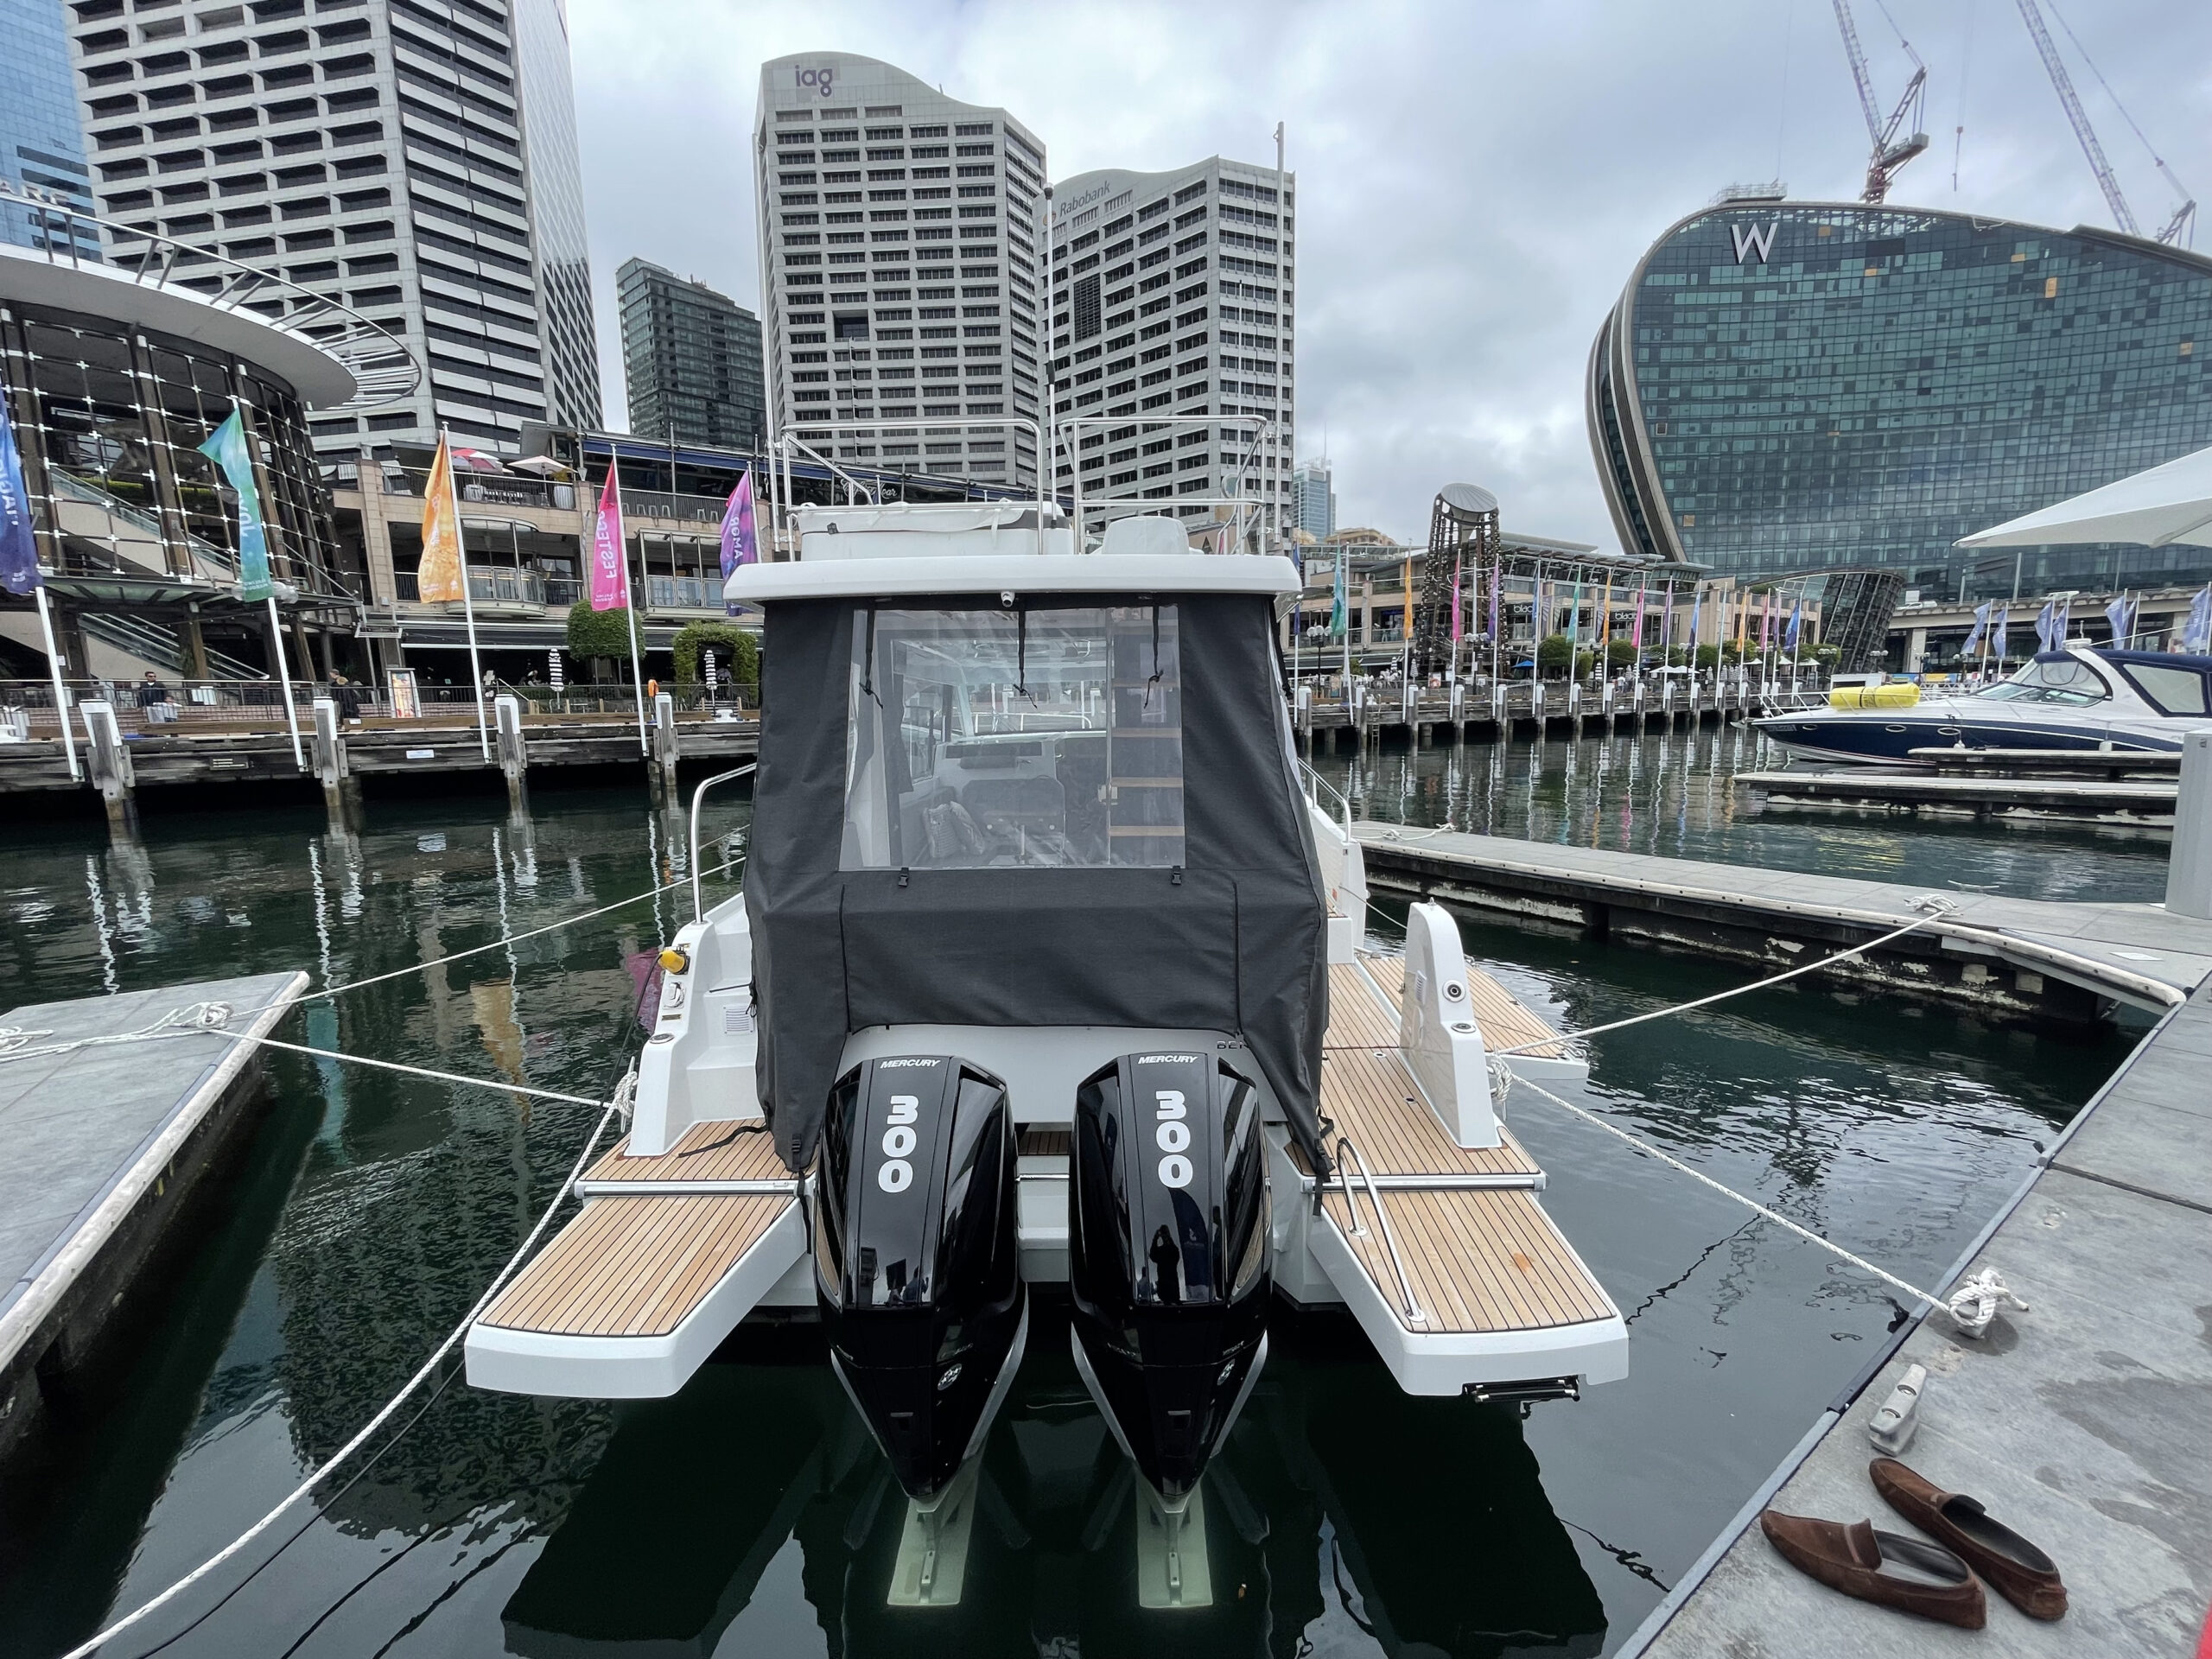 Beneteau Antares 11 pictured from rear with Darling Harbour in background